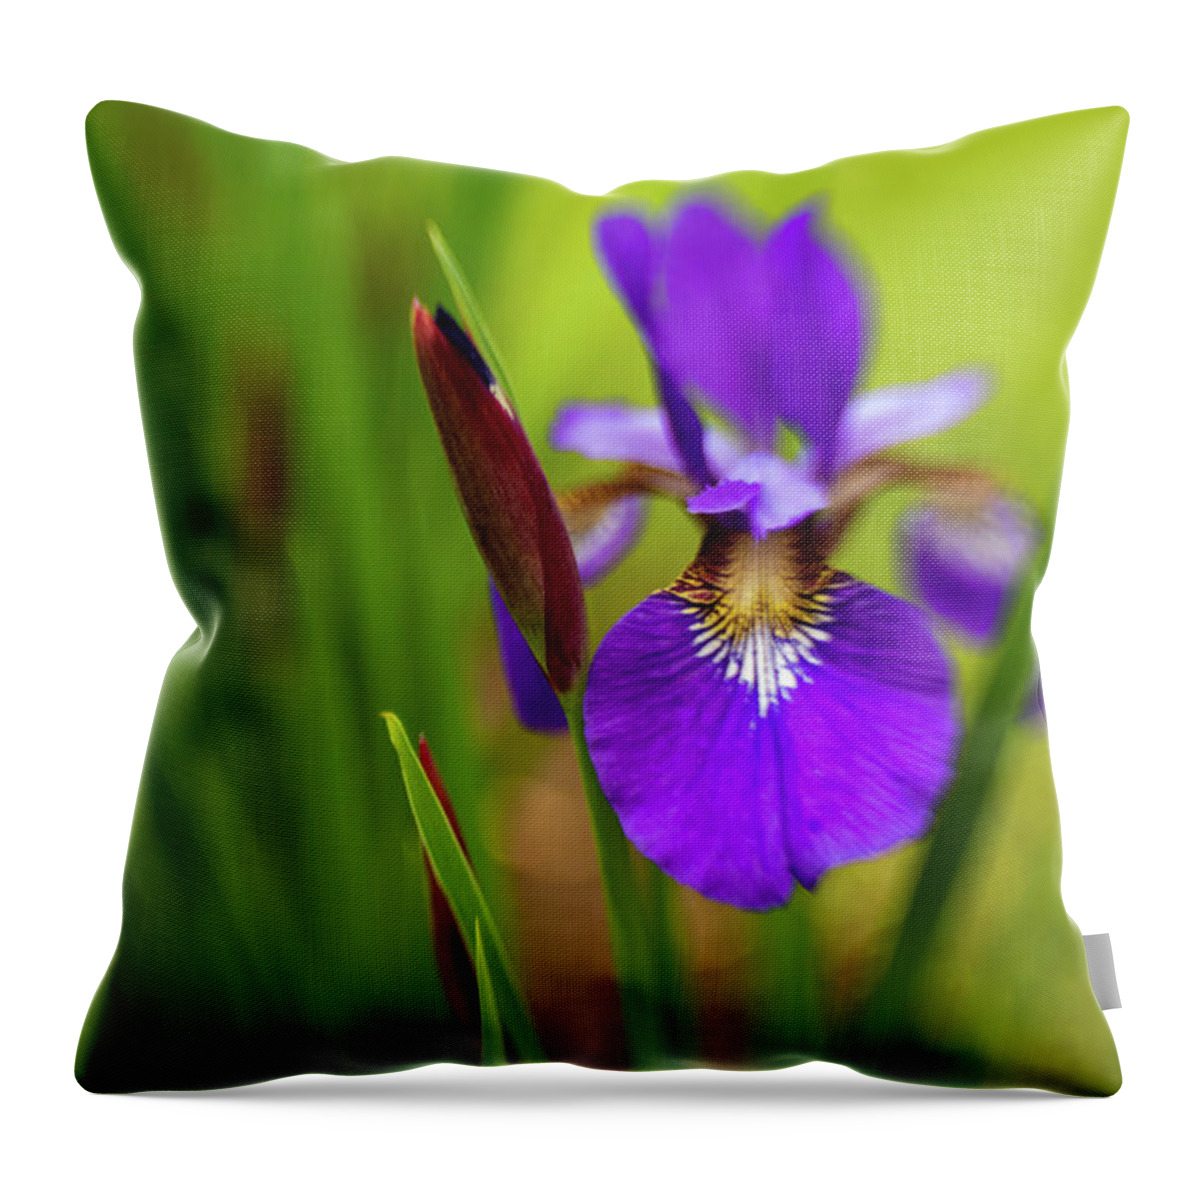 Caesar's Brother Throw Pillow featuring the photograph Caeser's Brother Siberian Iris by Pamela Taylor